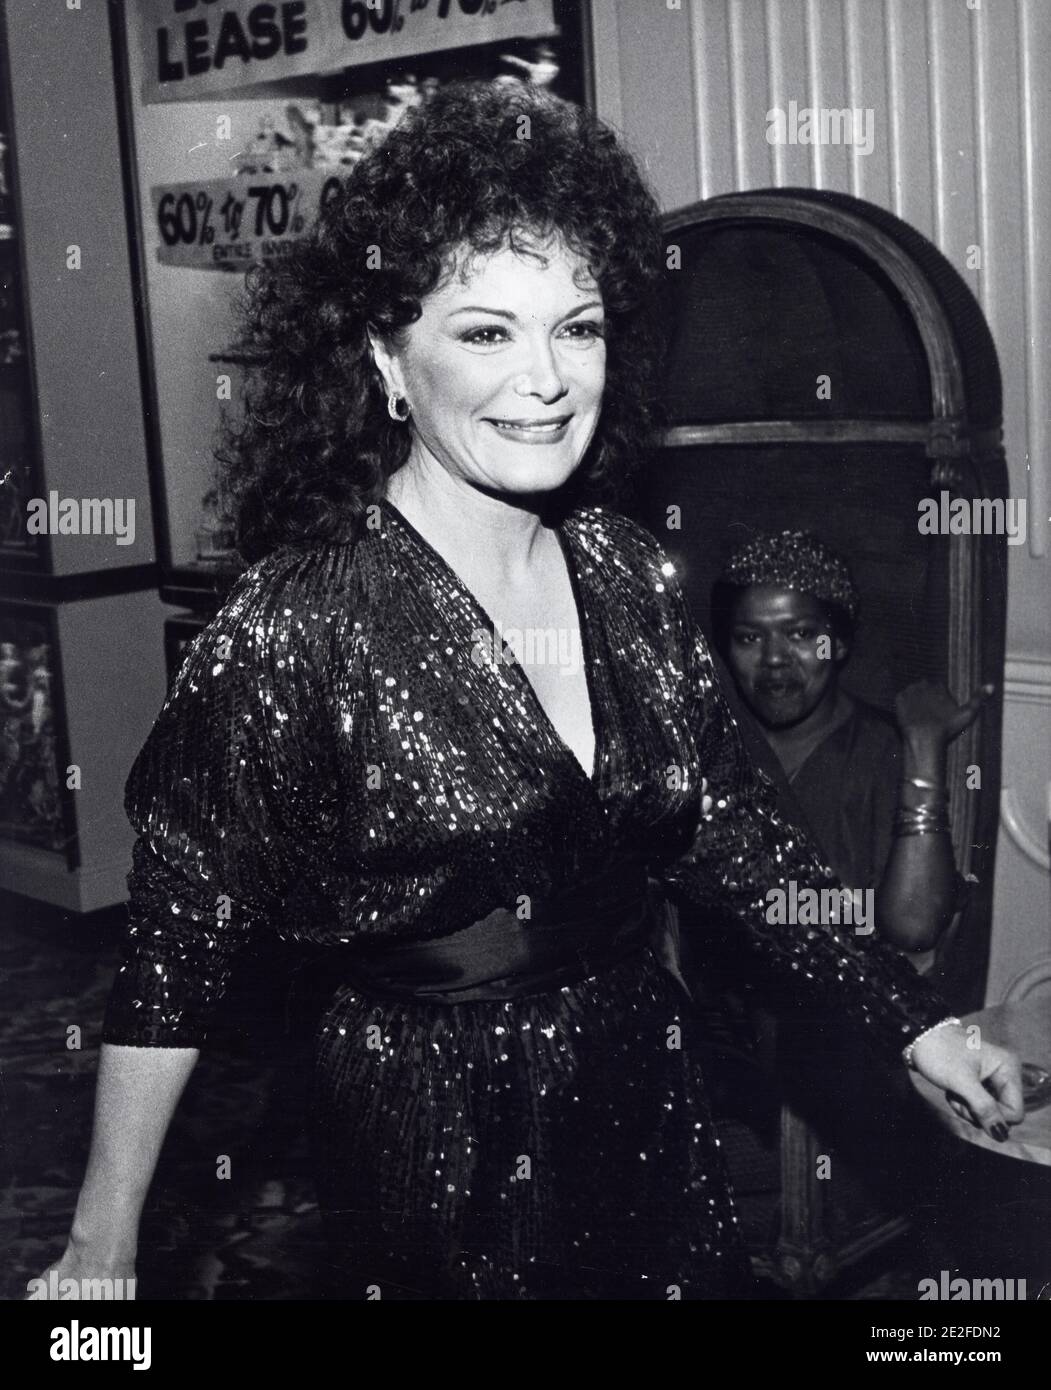 CONNIE FRANCIS Credit: Ralph Dominguez/MediaPunch Stockfoto